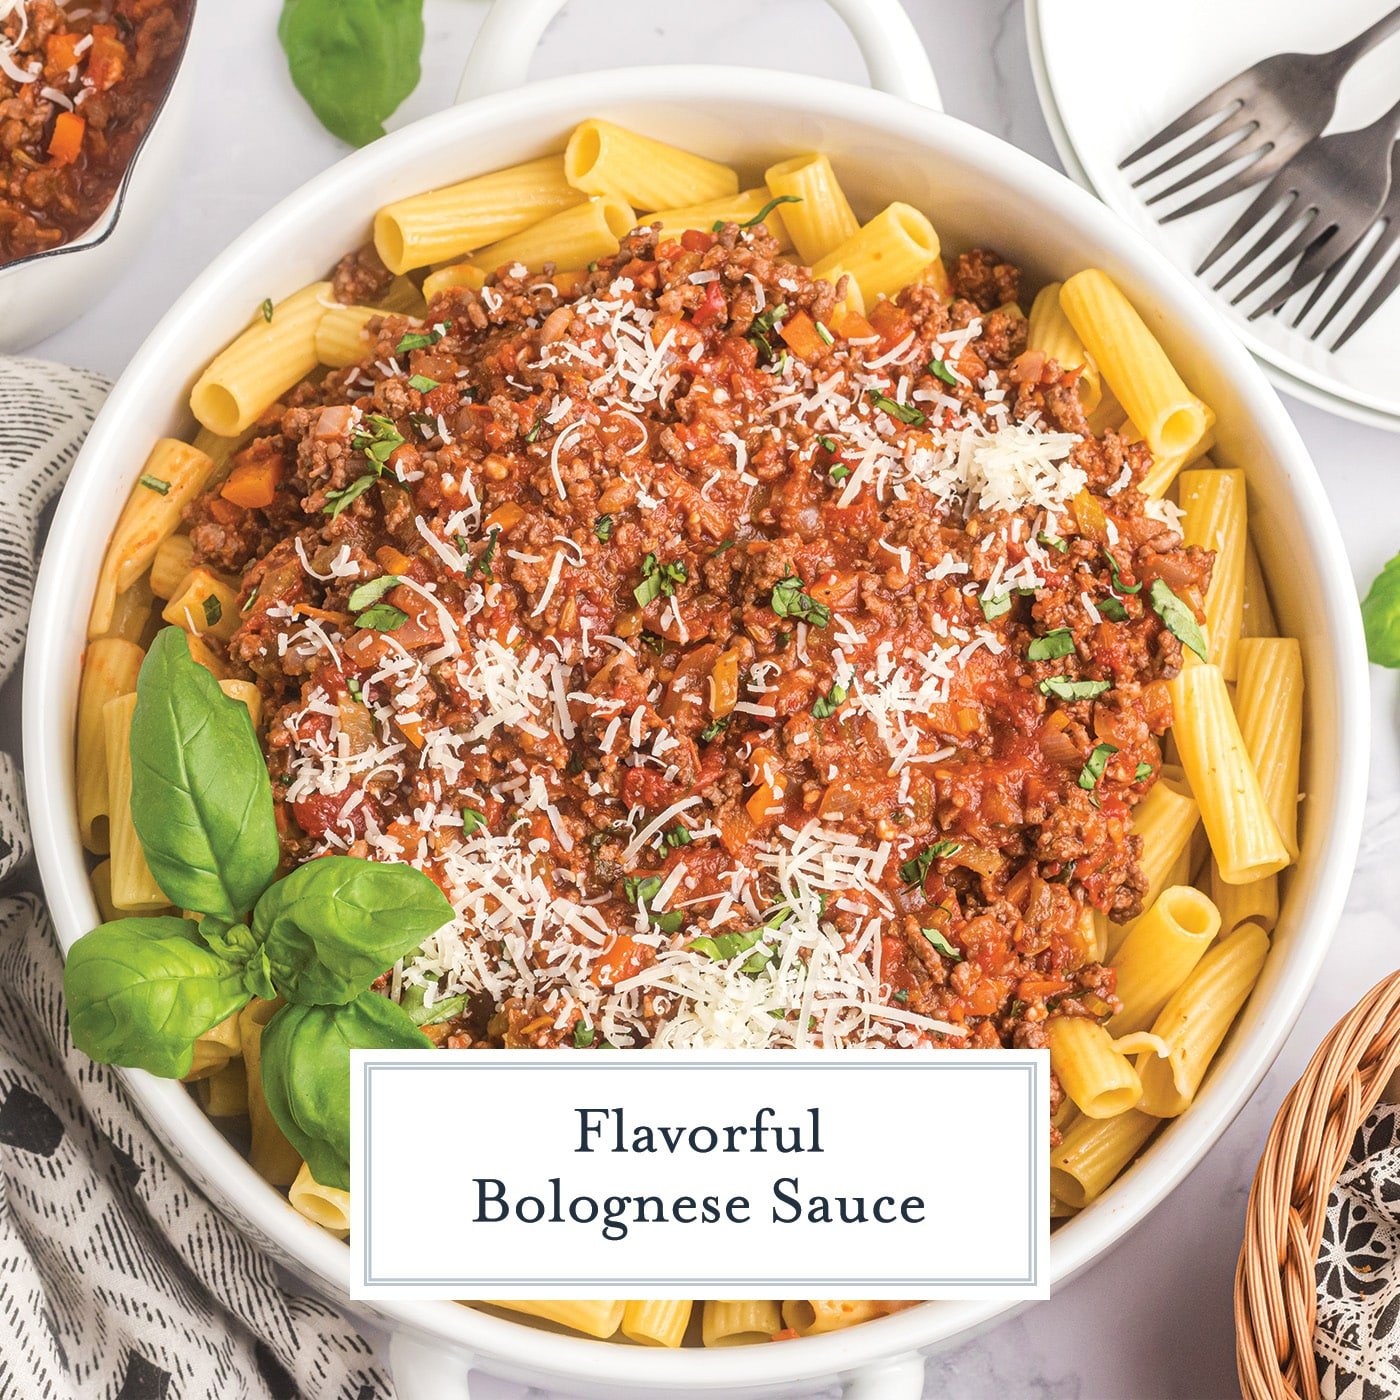 bowl of pasta topped with bolognese sauce with text overlay for facebook